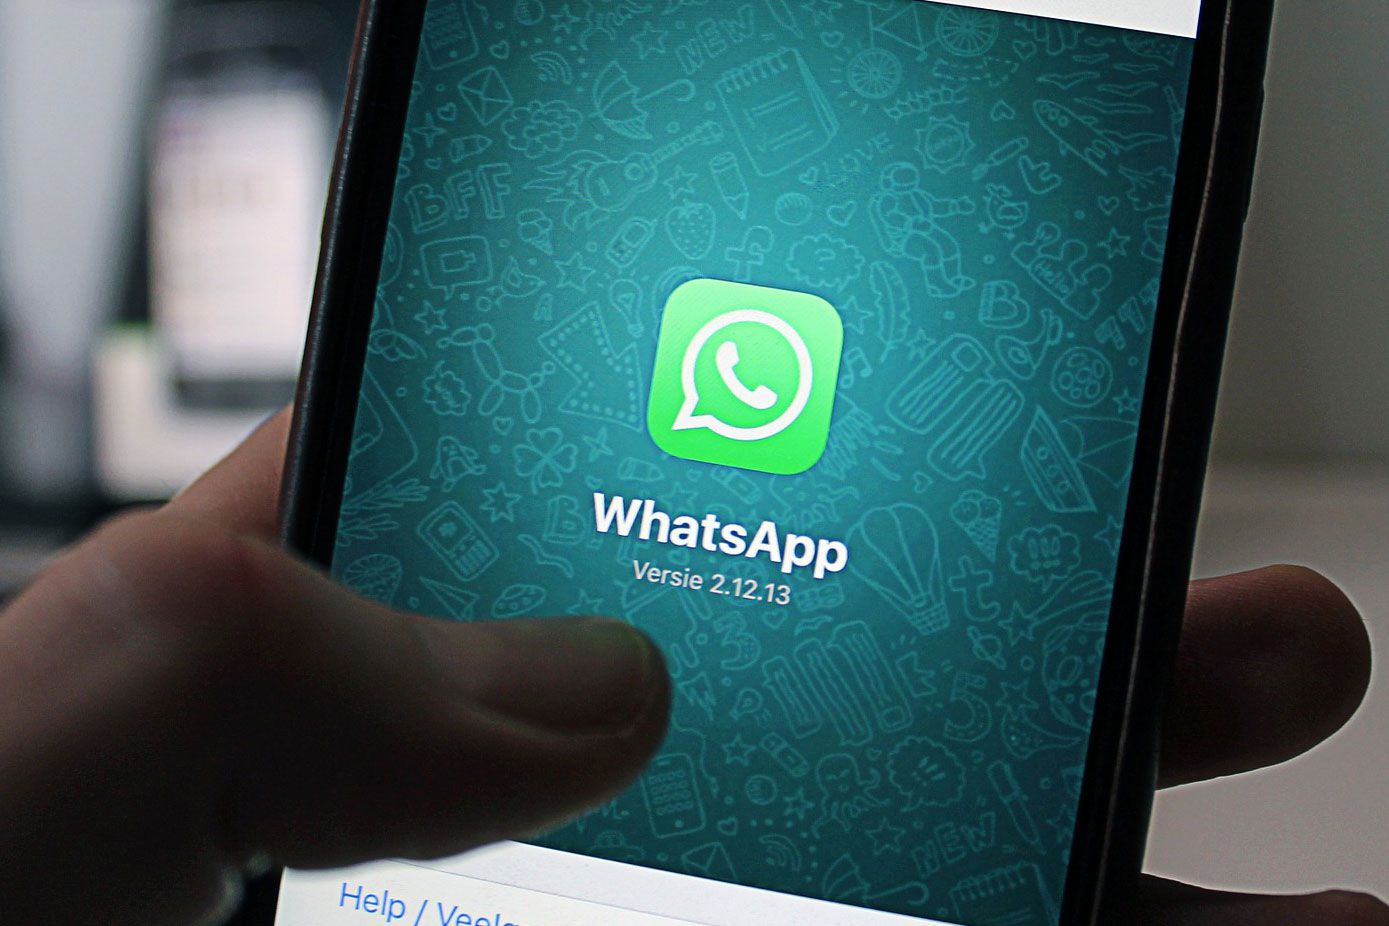 Got an older phone model? You may not be able to access WhatsApp soon